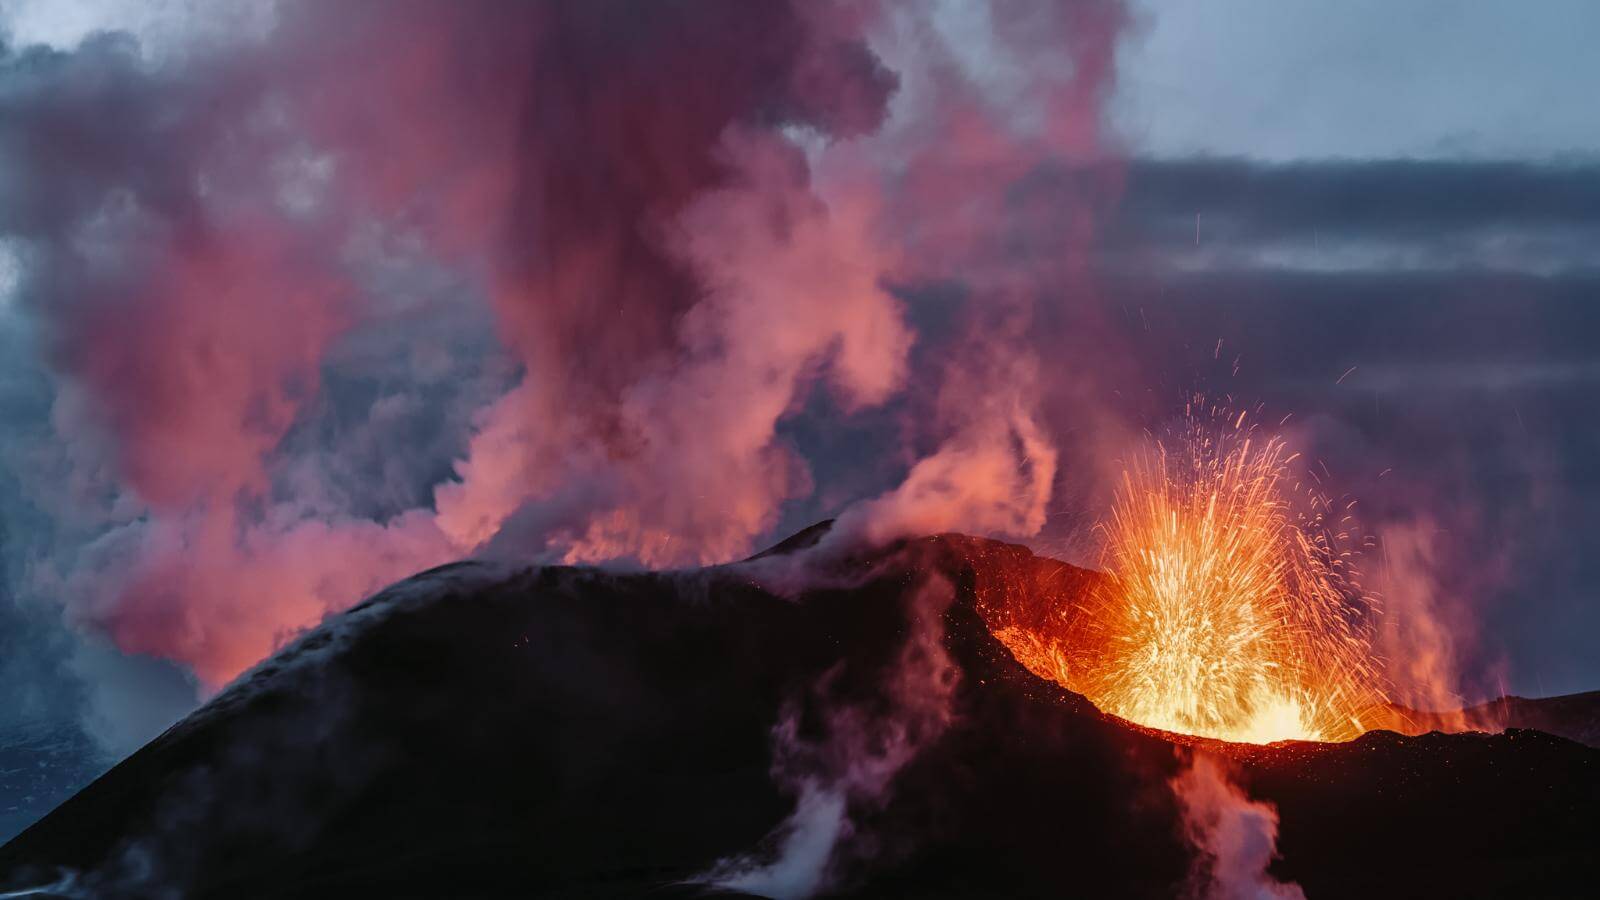 <p>Exhilarating, daring, magnificent, activity-filled, and instagrammable—there are many reasons to visit a volcanic destination. Other than exploring spectacular scenery, depending on which volcanic destination you go to, it can end up being an engaging history and science class—don’t we all love an immersive experience?</p> <p>There are many spectacular volcanic destinations thrill seekers can visit and enjoy some adrenaline rush. Whether you are just looking for an opportunity to explore Earth’s dynamic nature or are simply into adventure, these spectacular volcanic destinations are gems you should add to your bucket list.</p>